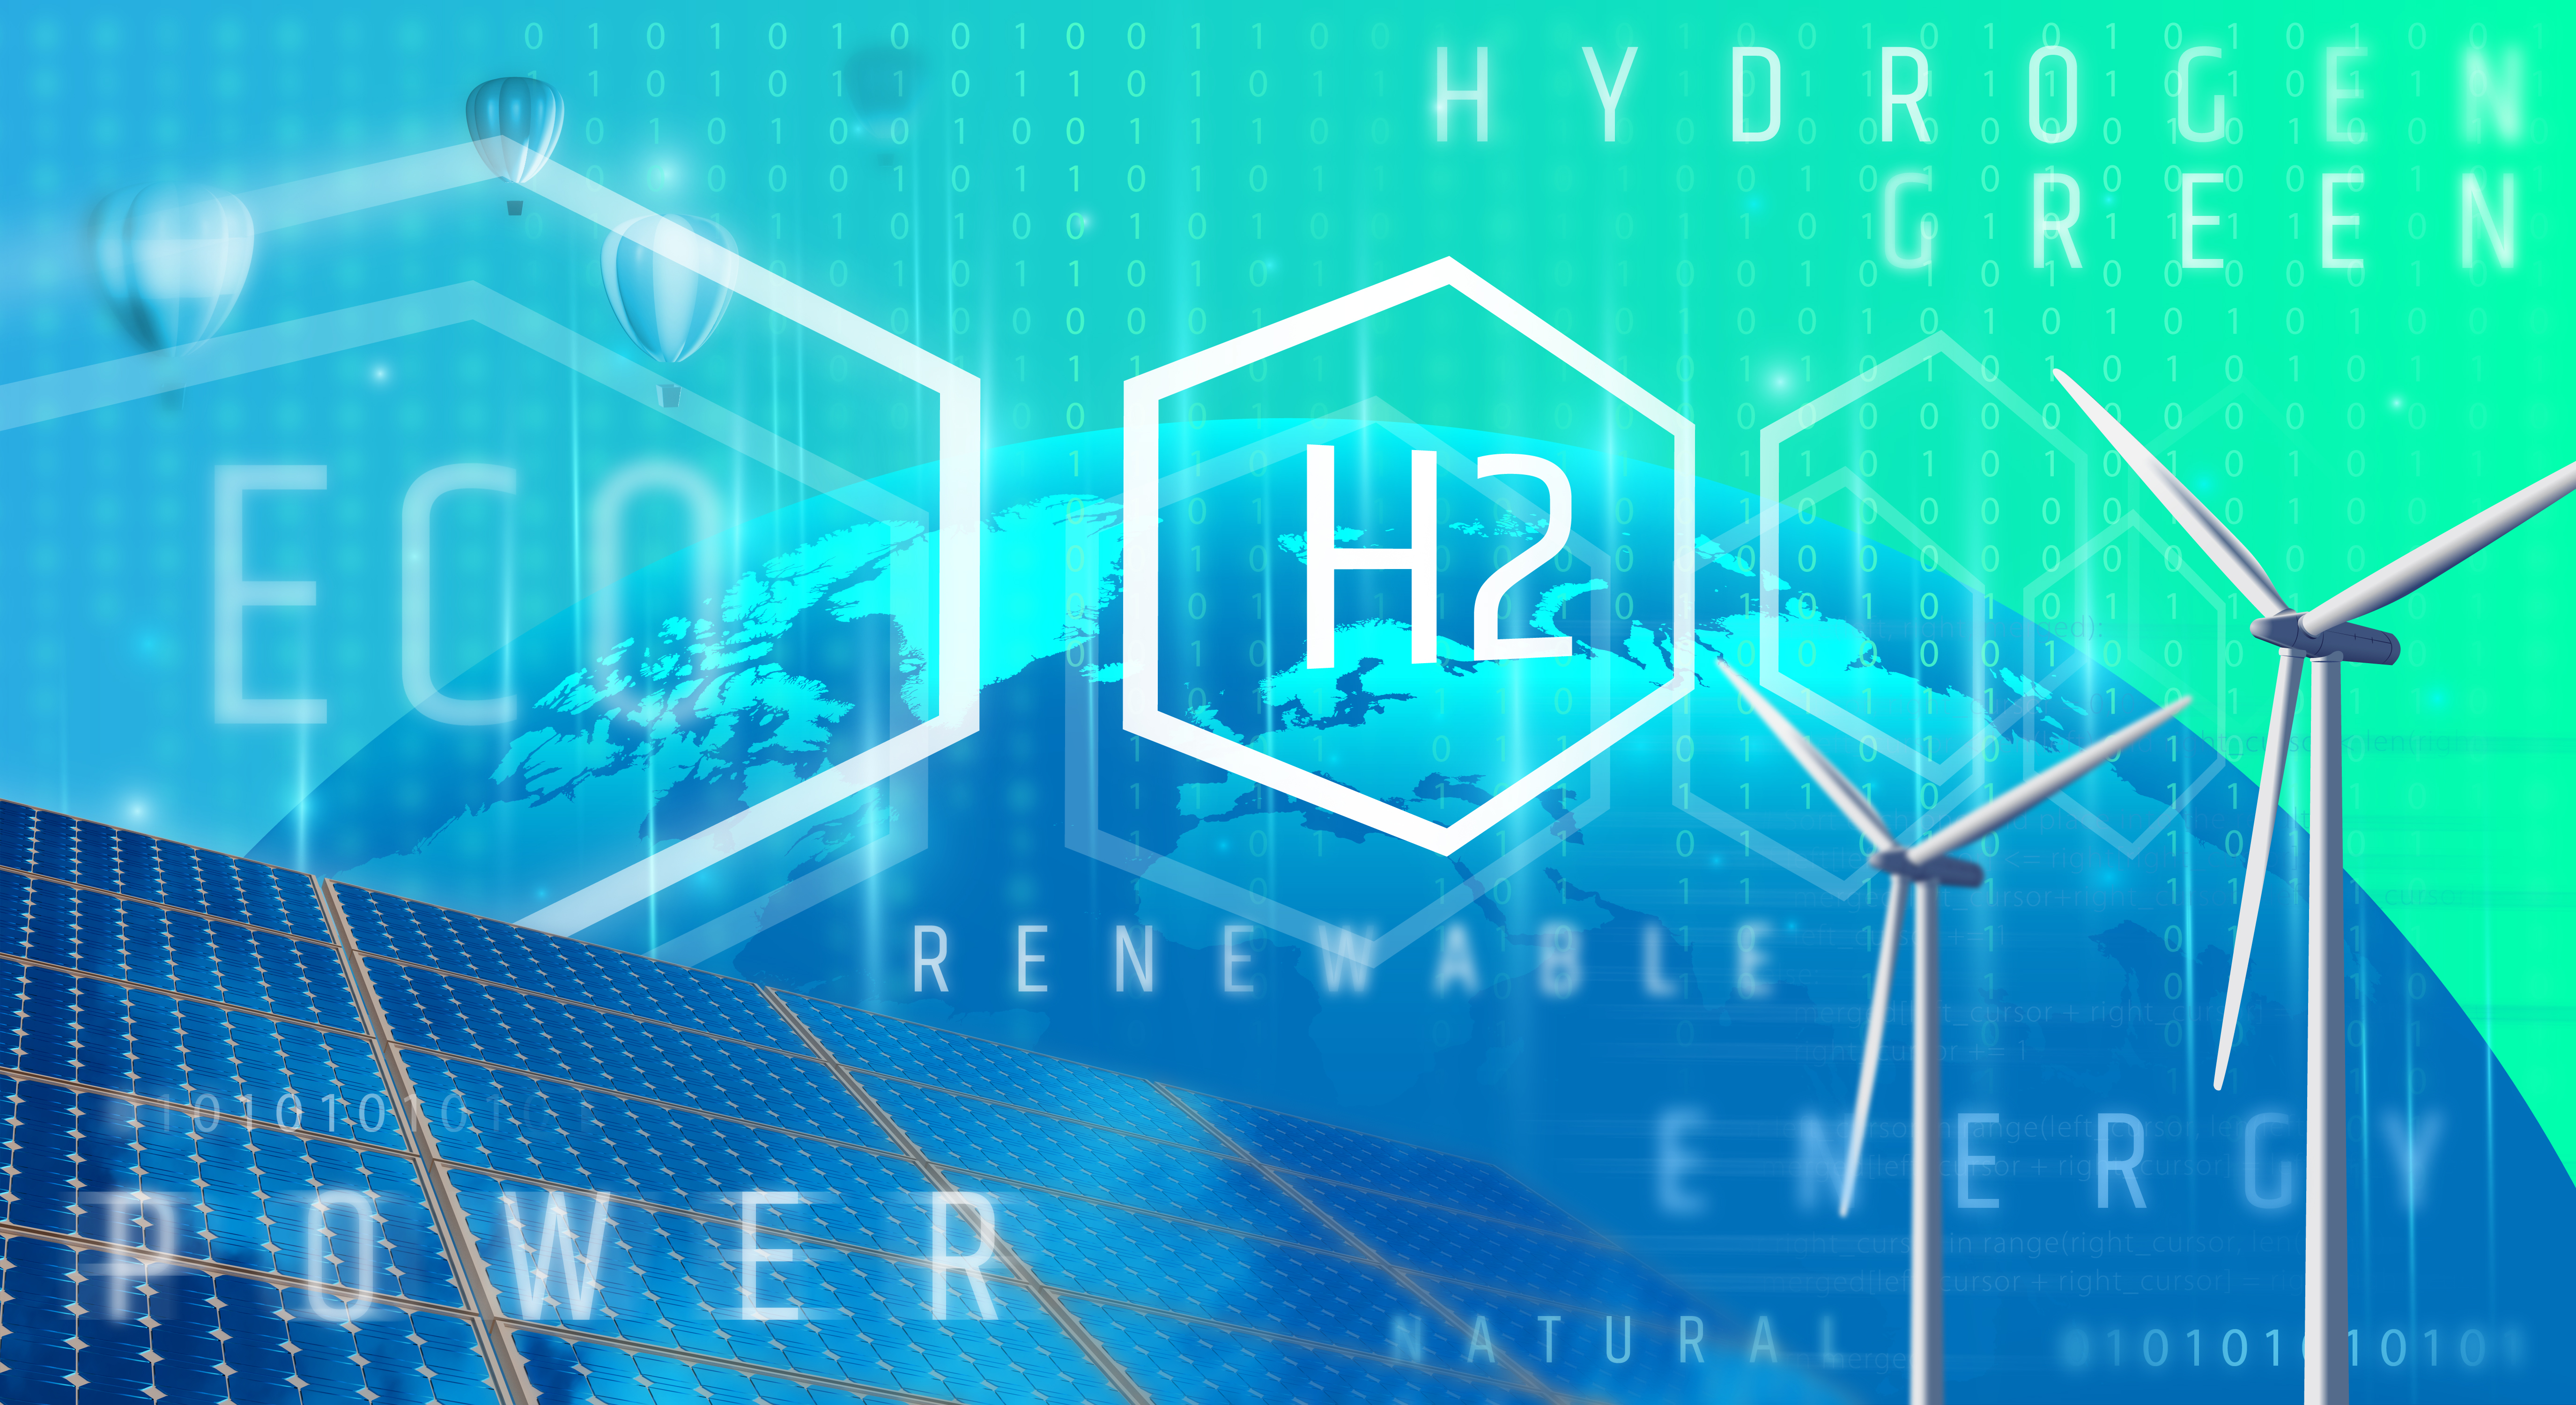 The future home market will also need hydrogen sensors